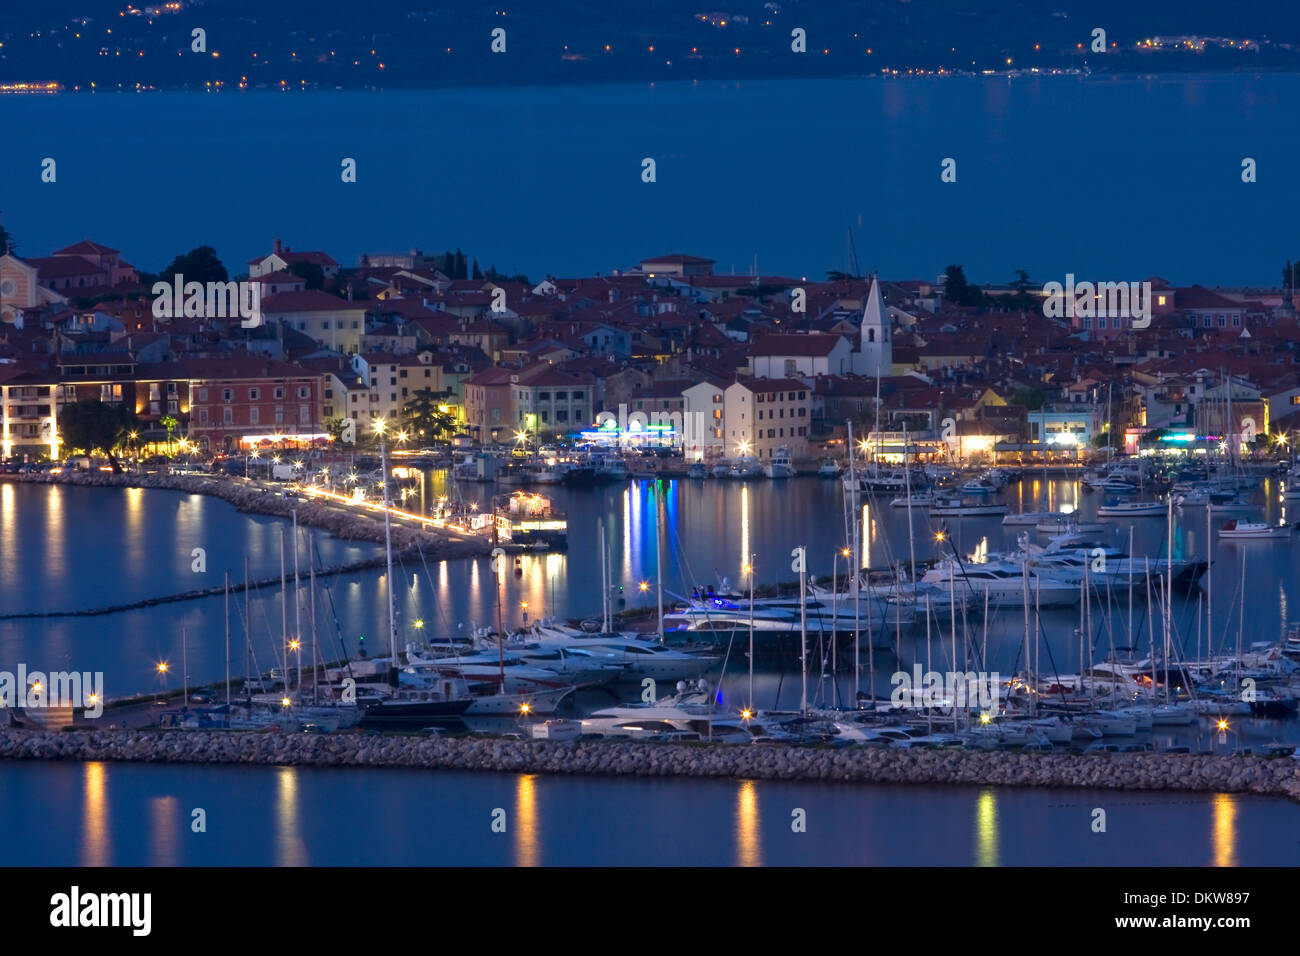 Evening evening Adriatic Old Town anchor outside Balkan boats Europe Izola marina sail boats Slovenia town city town view Stock Photo